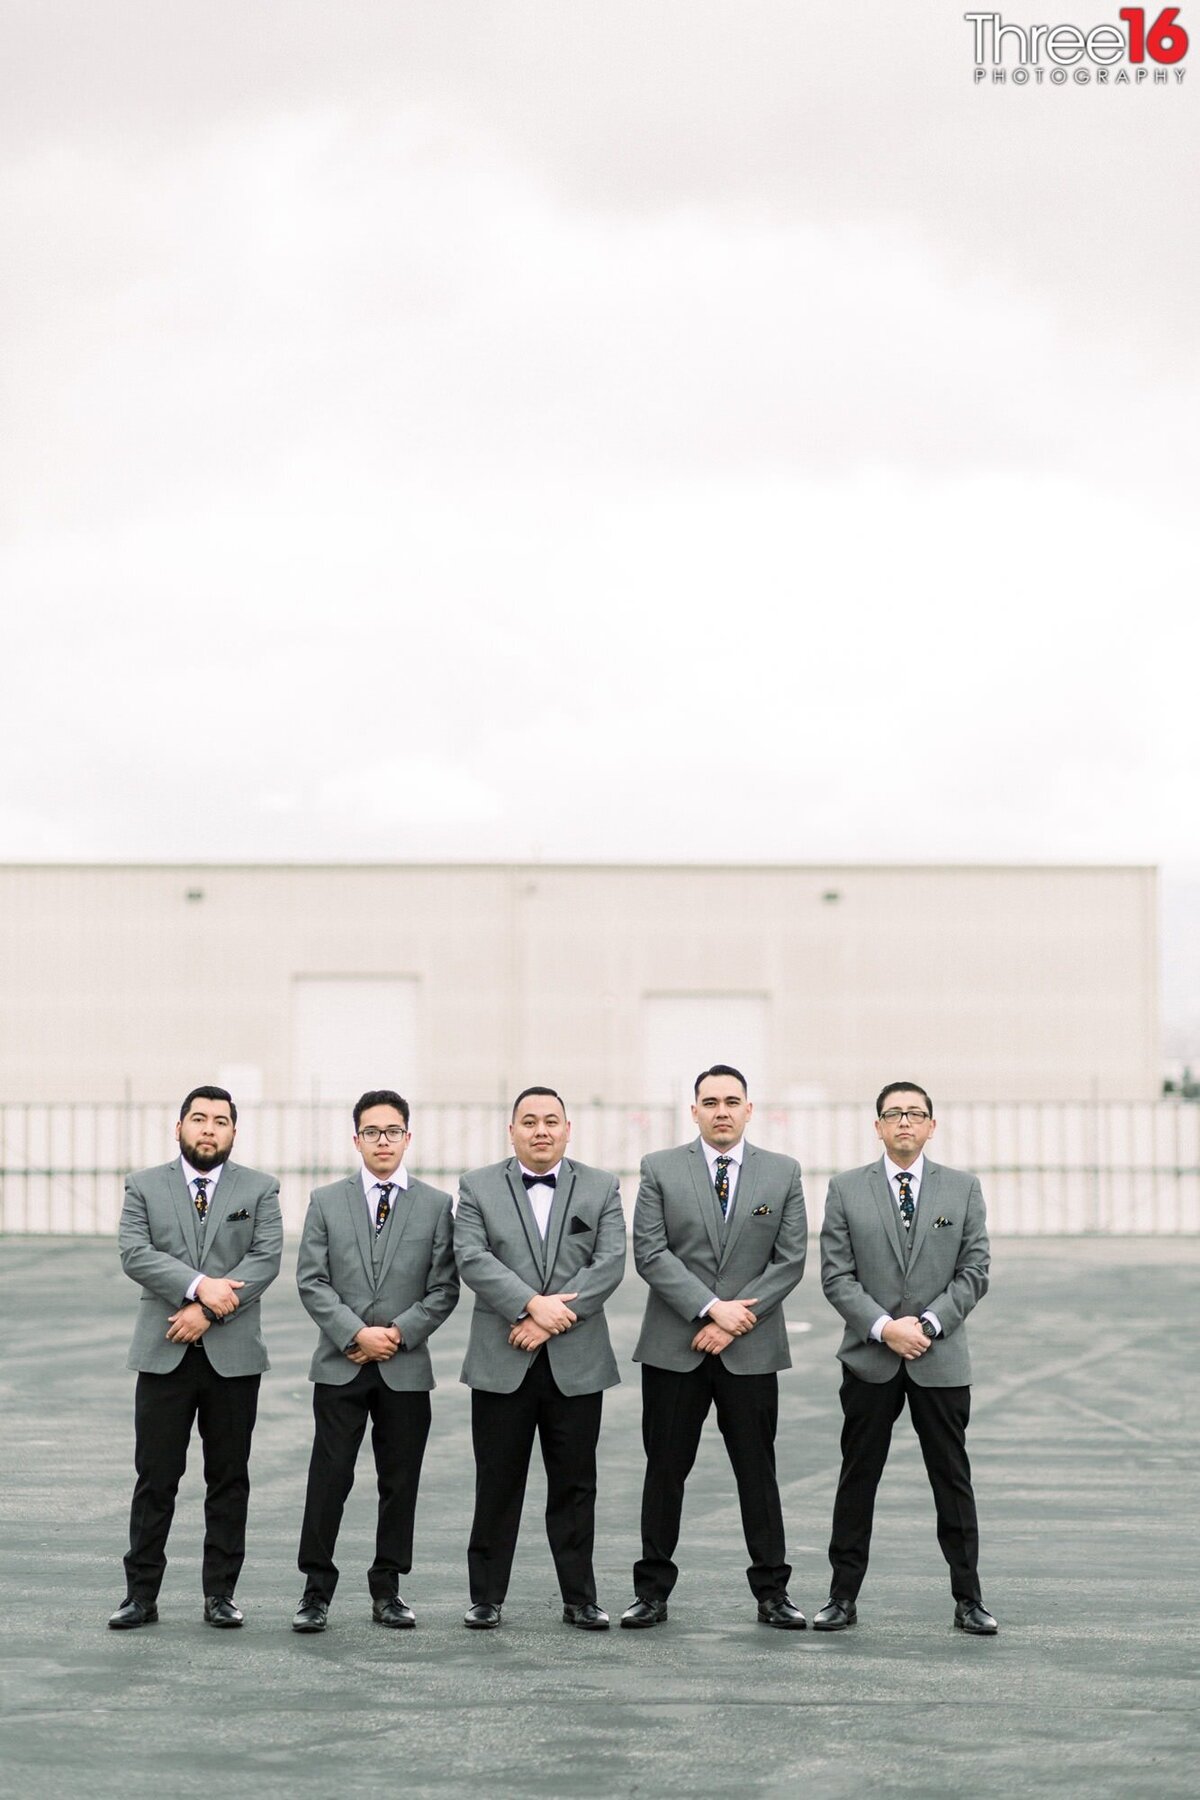 Groom and Groomsmen pose together with hands over wrists in a sign of unity and friendship